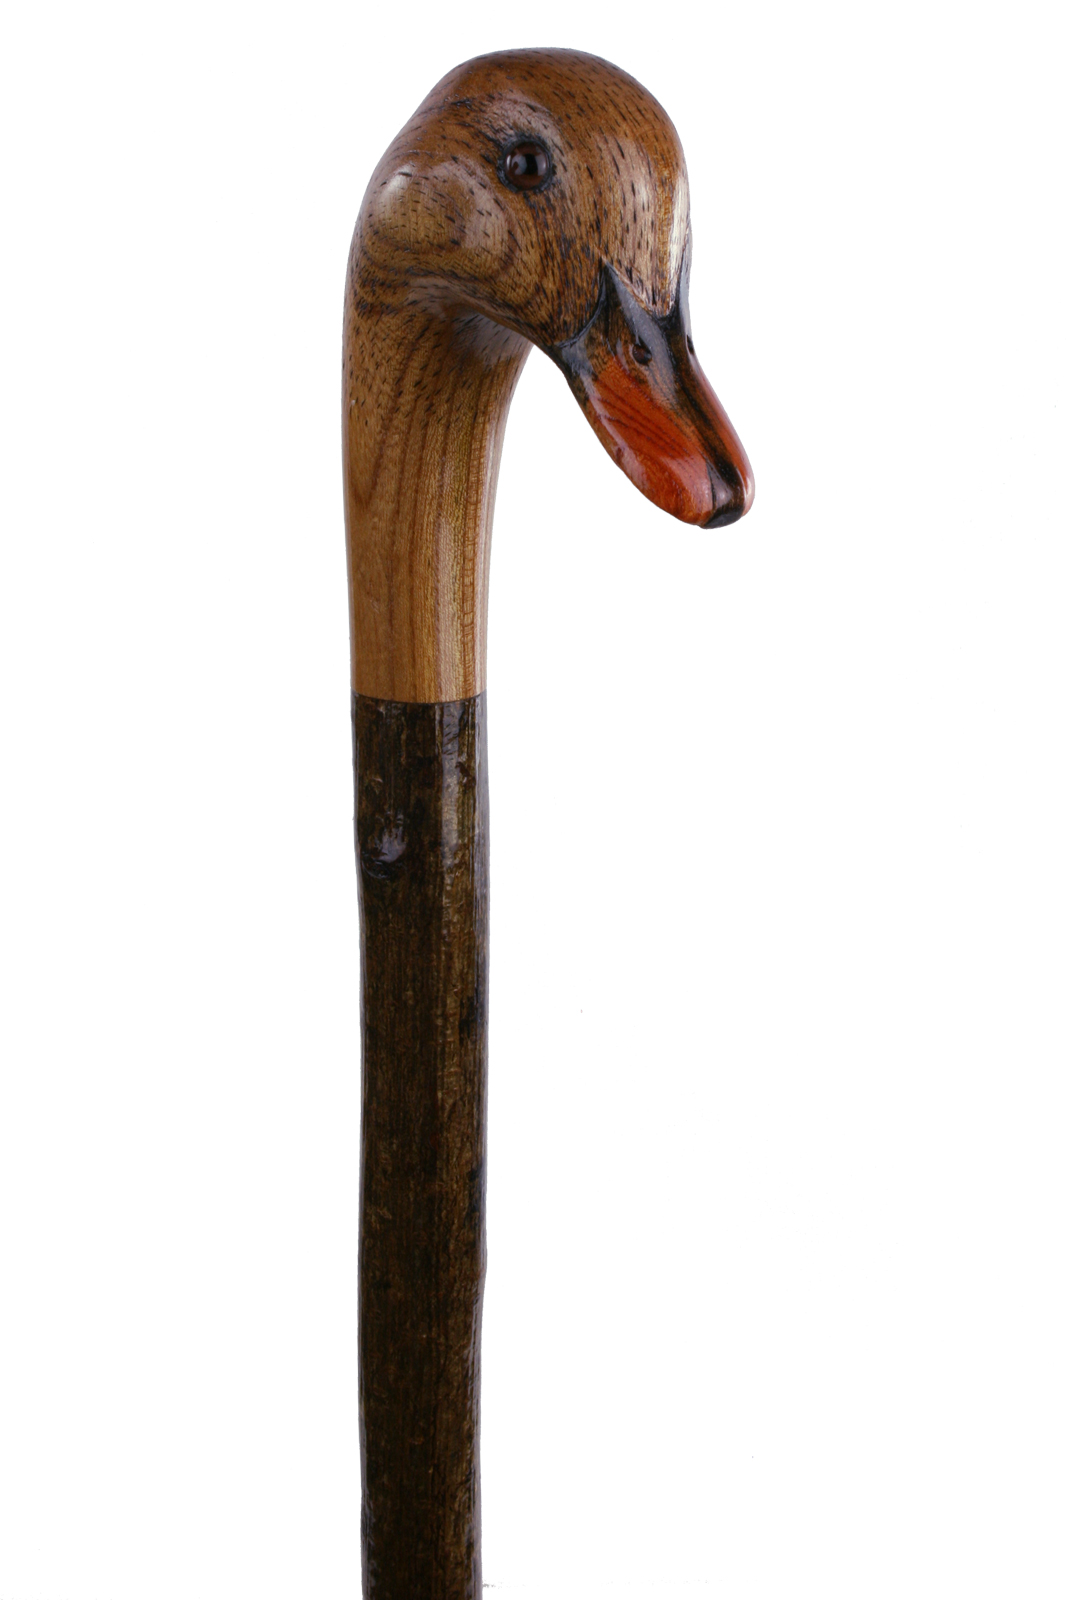 https://www.stickandcaneshop.co.uk/user/products/large/pic_MG_2022_HandcarvedCrook_Duck_1.jpg